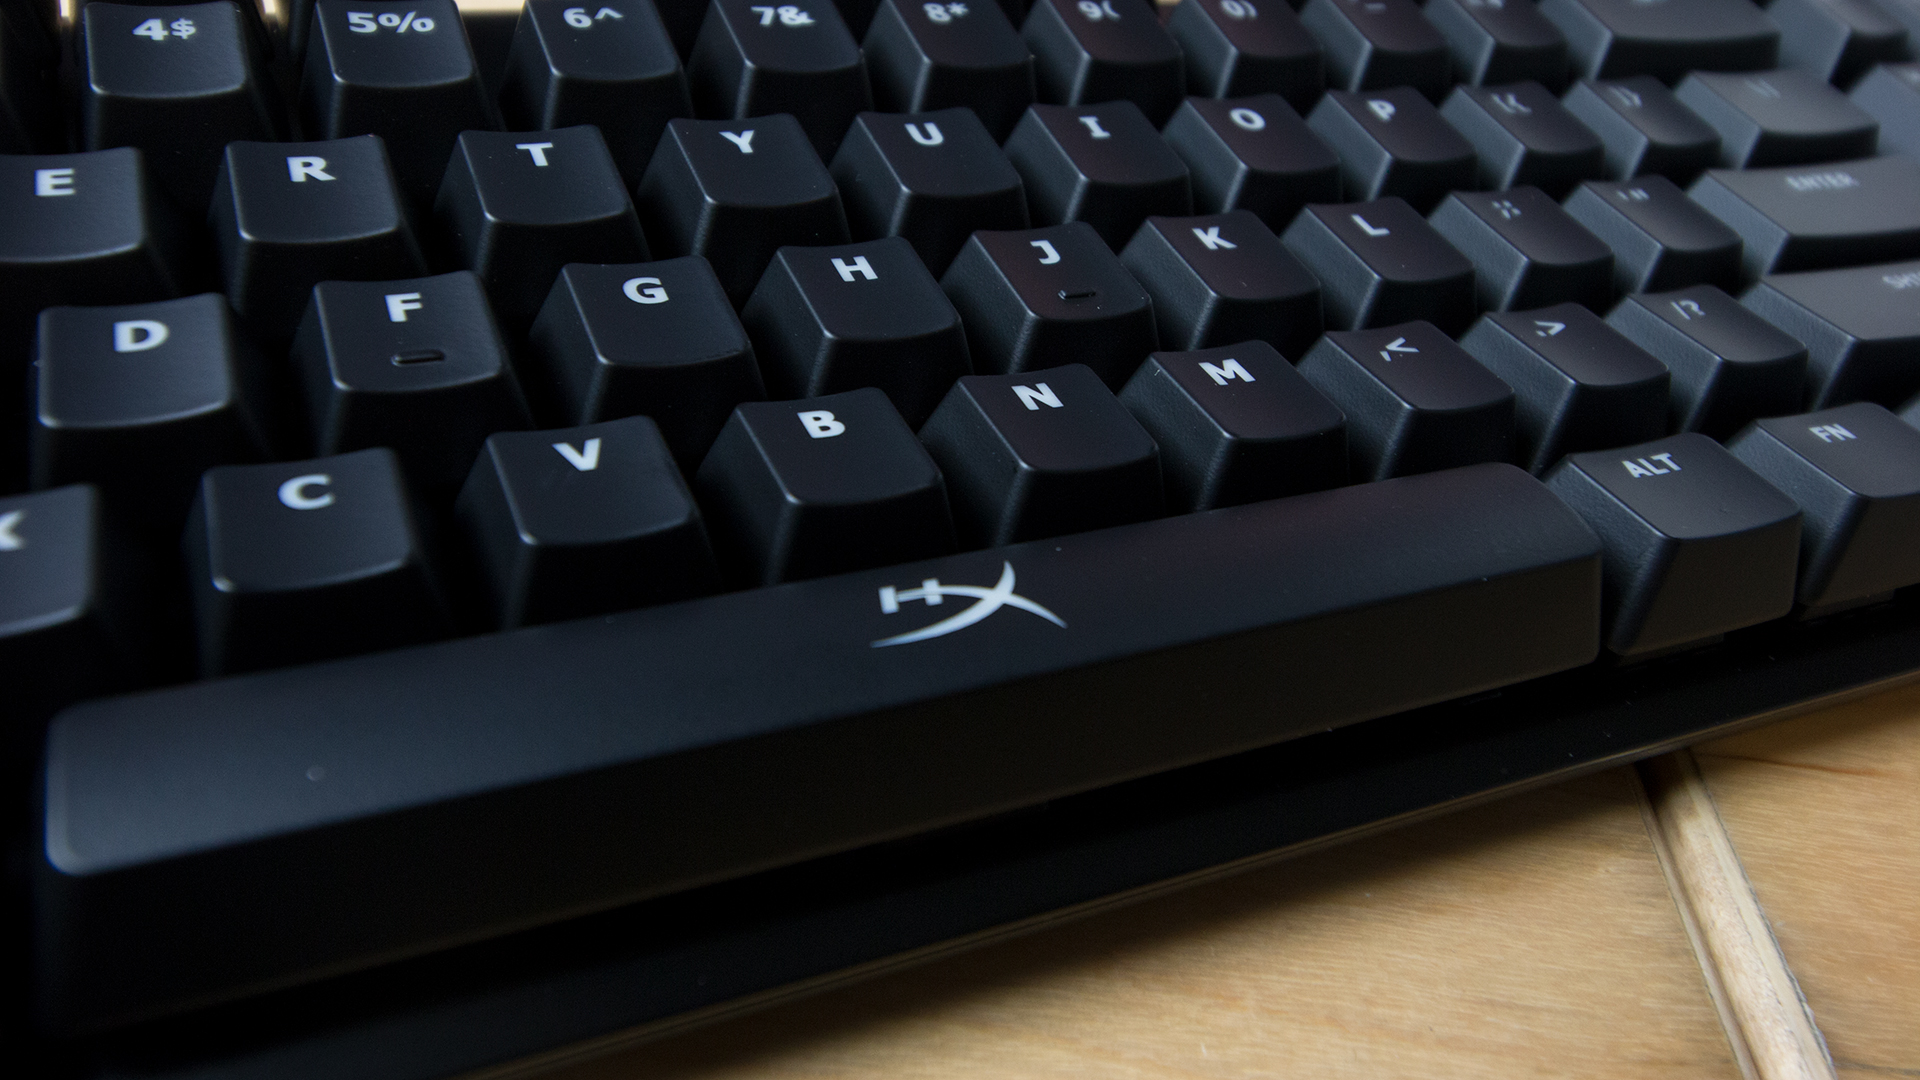 HyperX Alloy FPS Mechanical Gaming Keyboard Review: A Happy Minimum